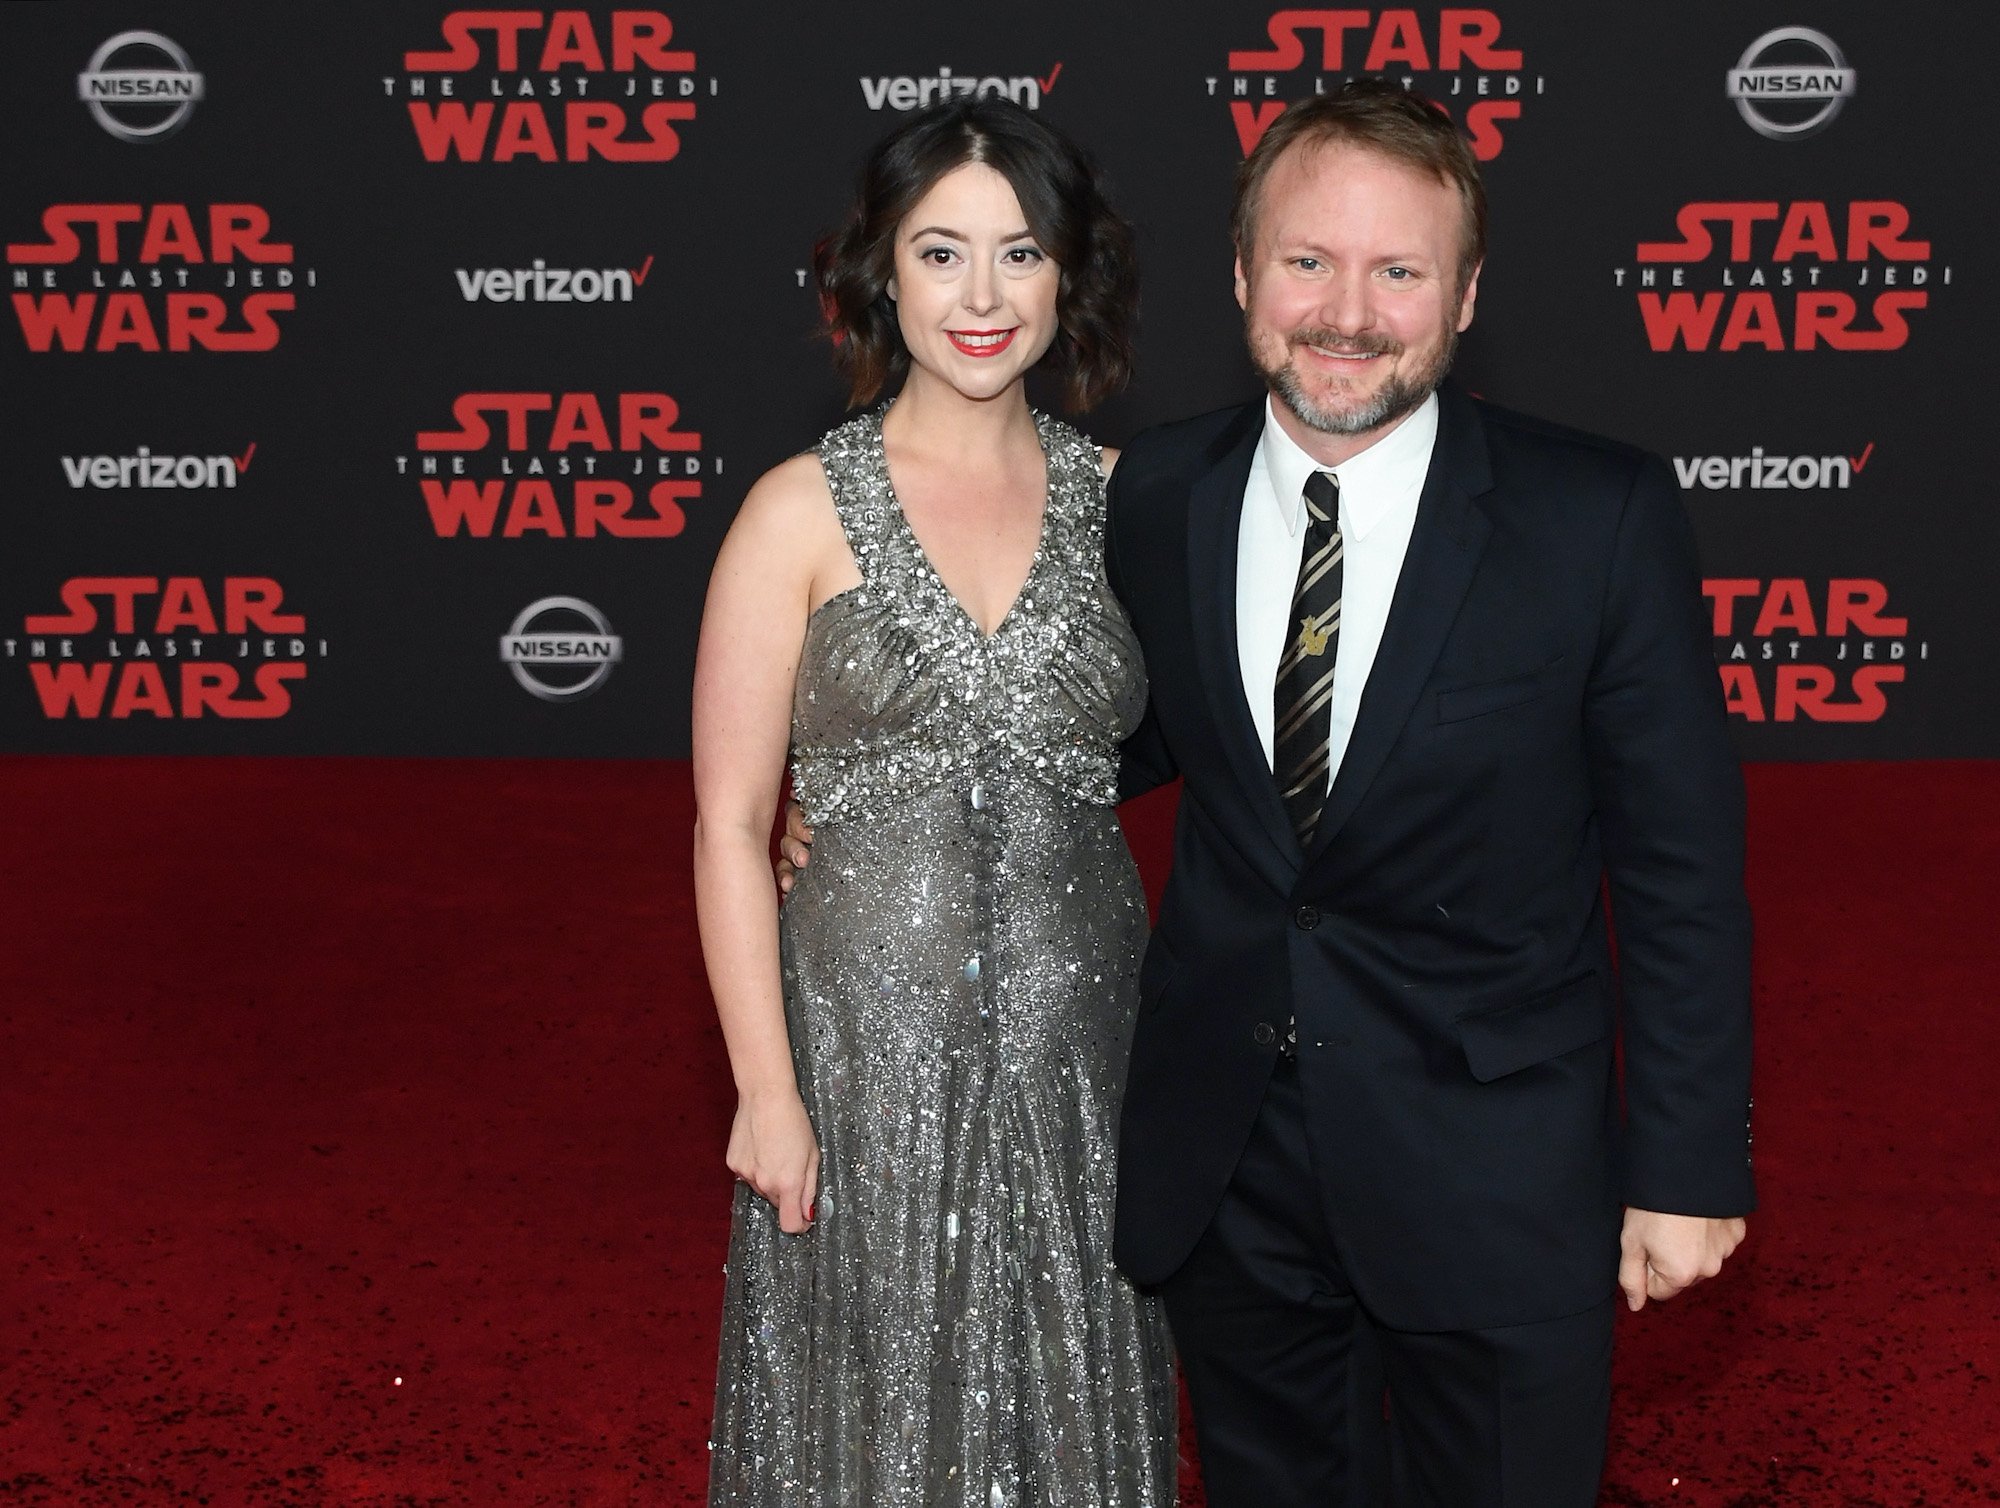 Rian Johnson attends the premiere of Disney Pictures and Lucasfilm's "Star Wars: The Last Jedi"